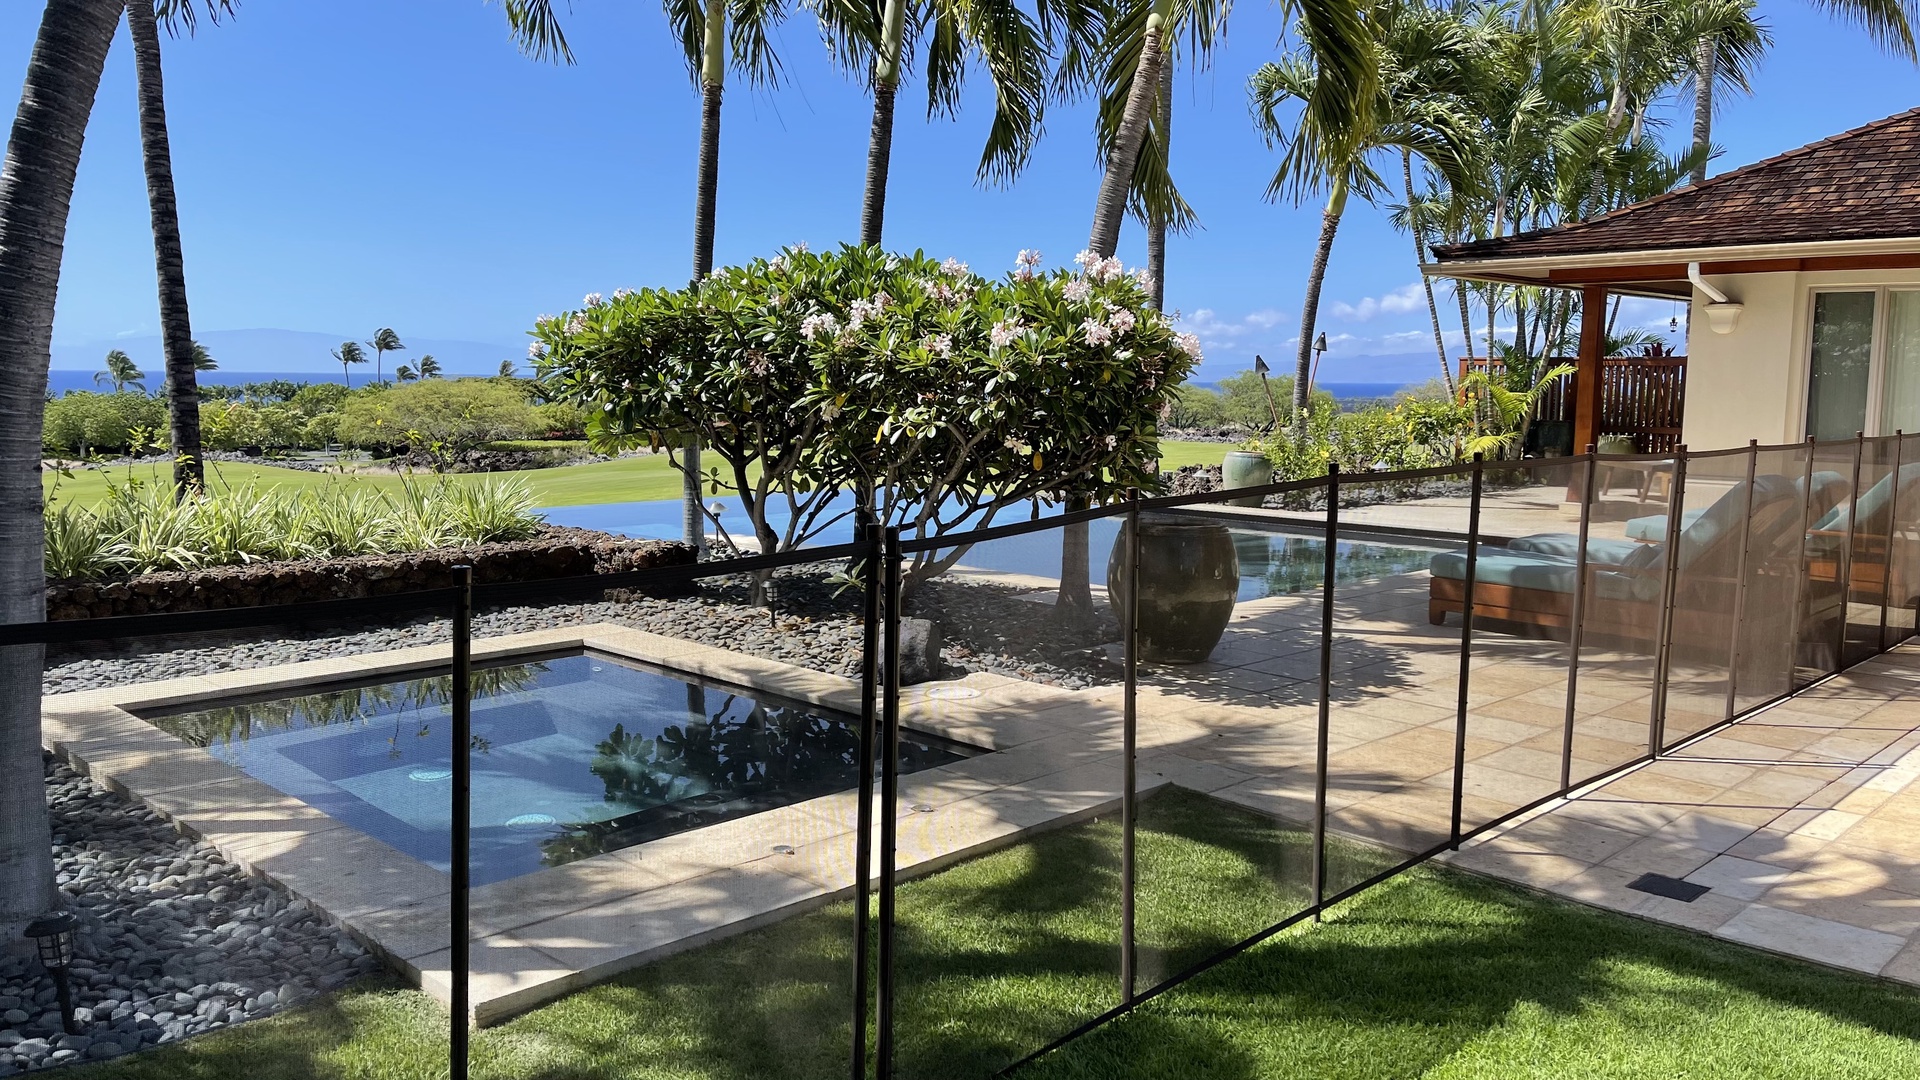 Kailua Kona Vacation Rentals, 4BD Hainoa Estate (102) at Four Seasons Resort at Hualalai - View of spa & pool w/ Child Safety Fence that can be set up upon request (set-up fee applies)